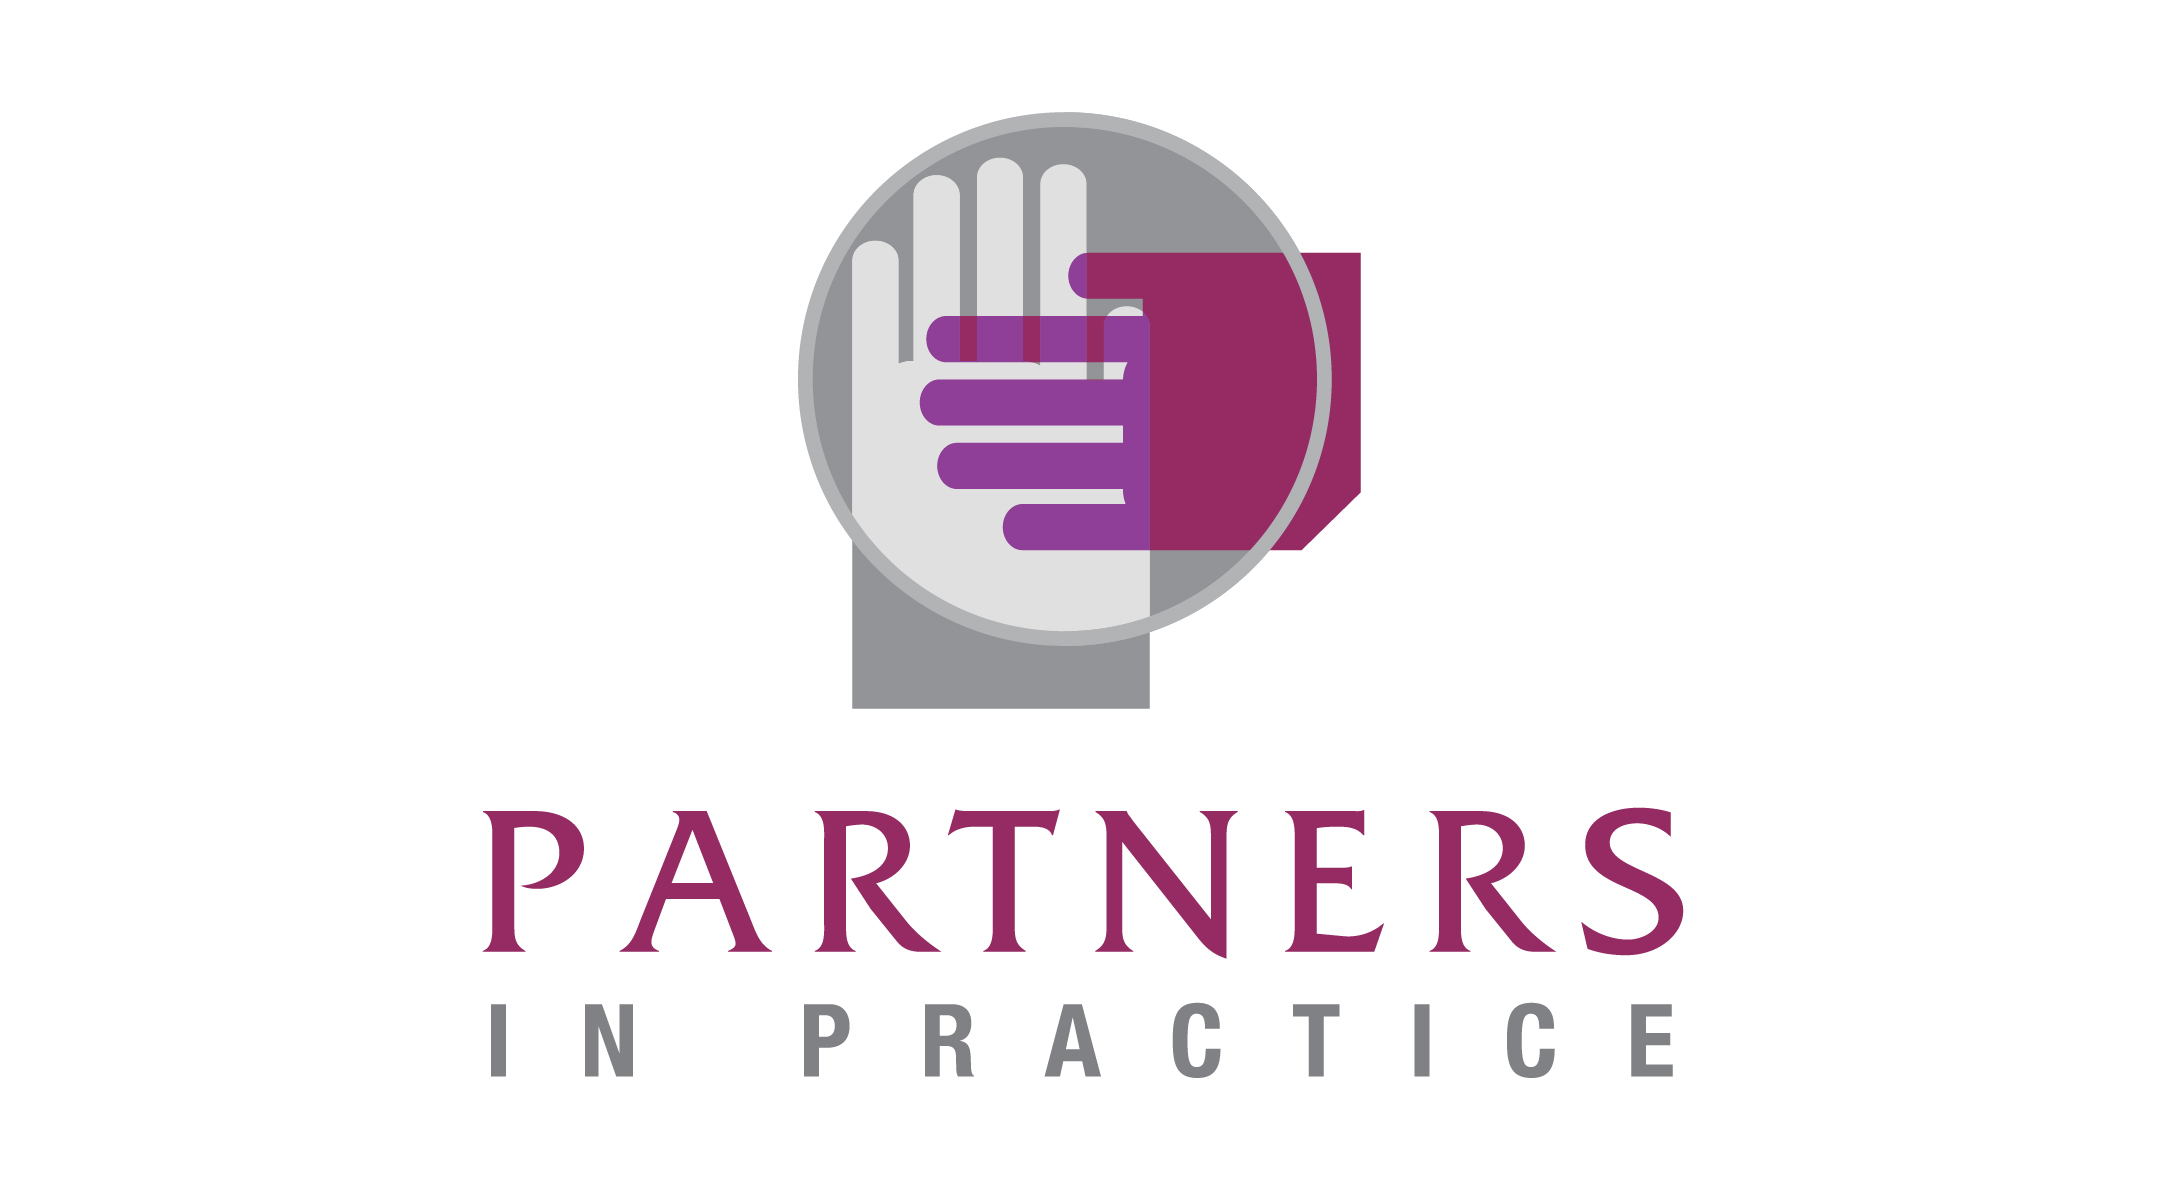 Logotype created for Partners in Practice, a division of Foundation for Better Healthcare.